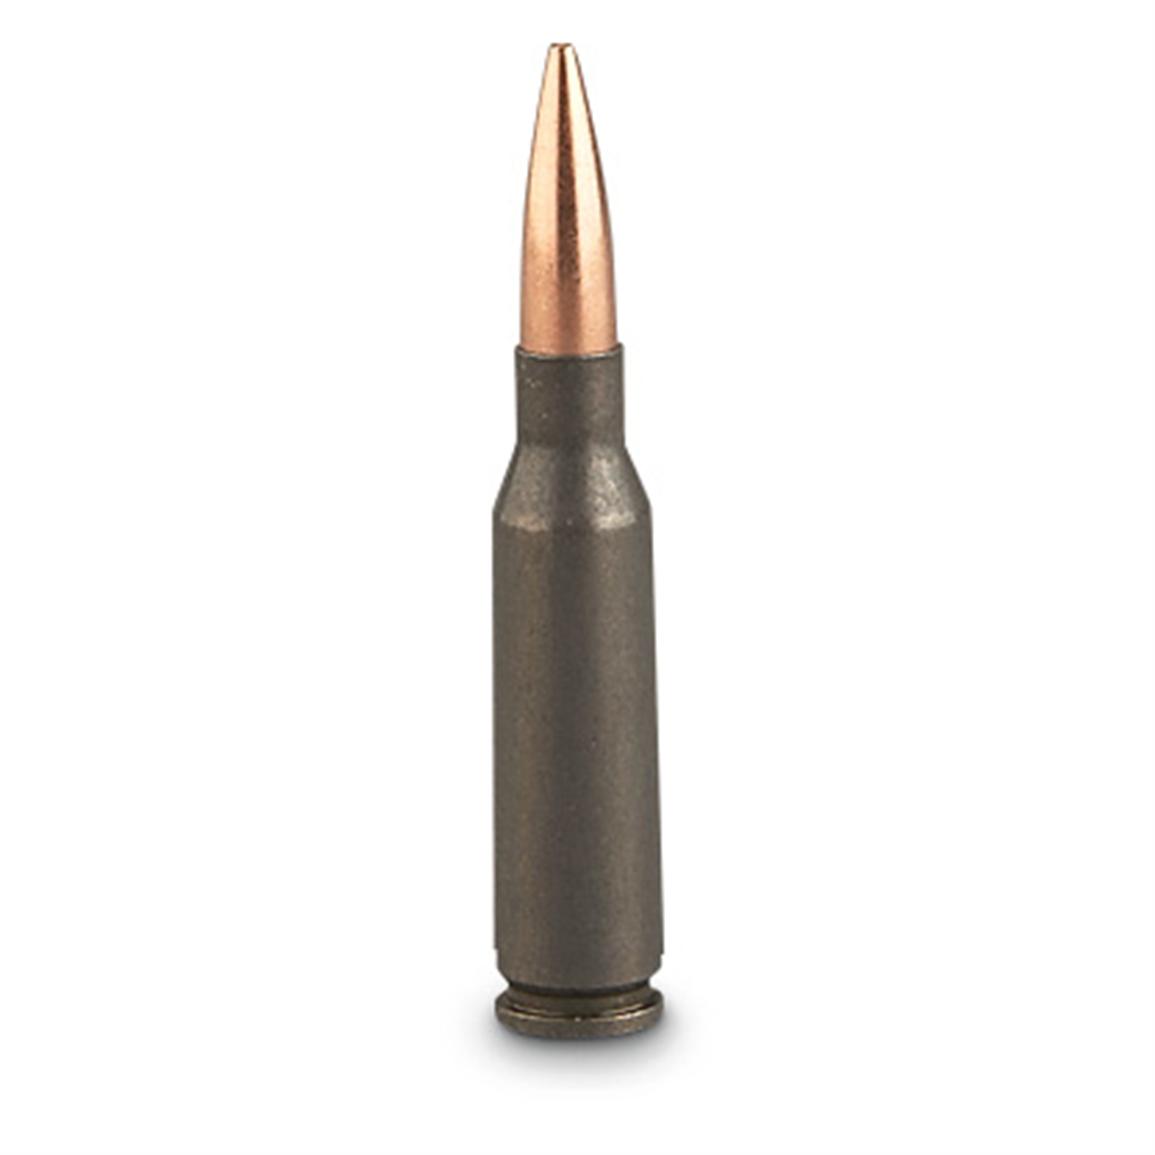 300 rds. 5.45x39mm 69 Grain FMJ Ammo with MTM™ Can - 594115, 5.45x39mm ...